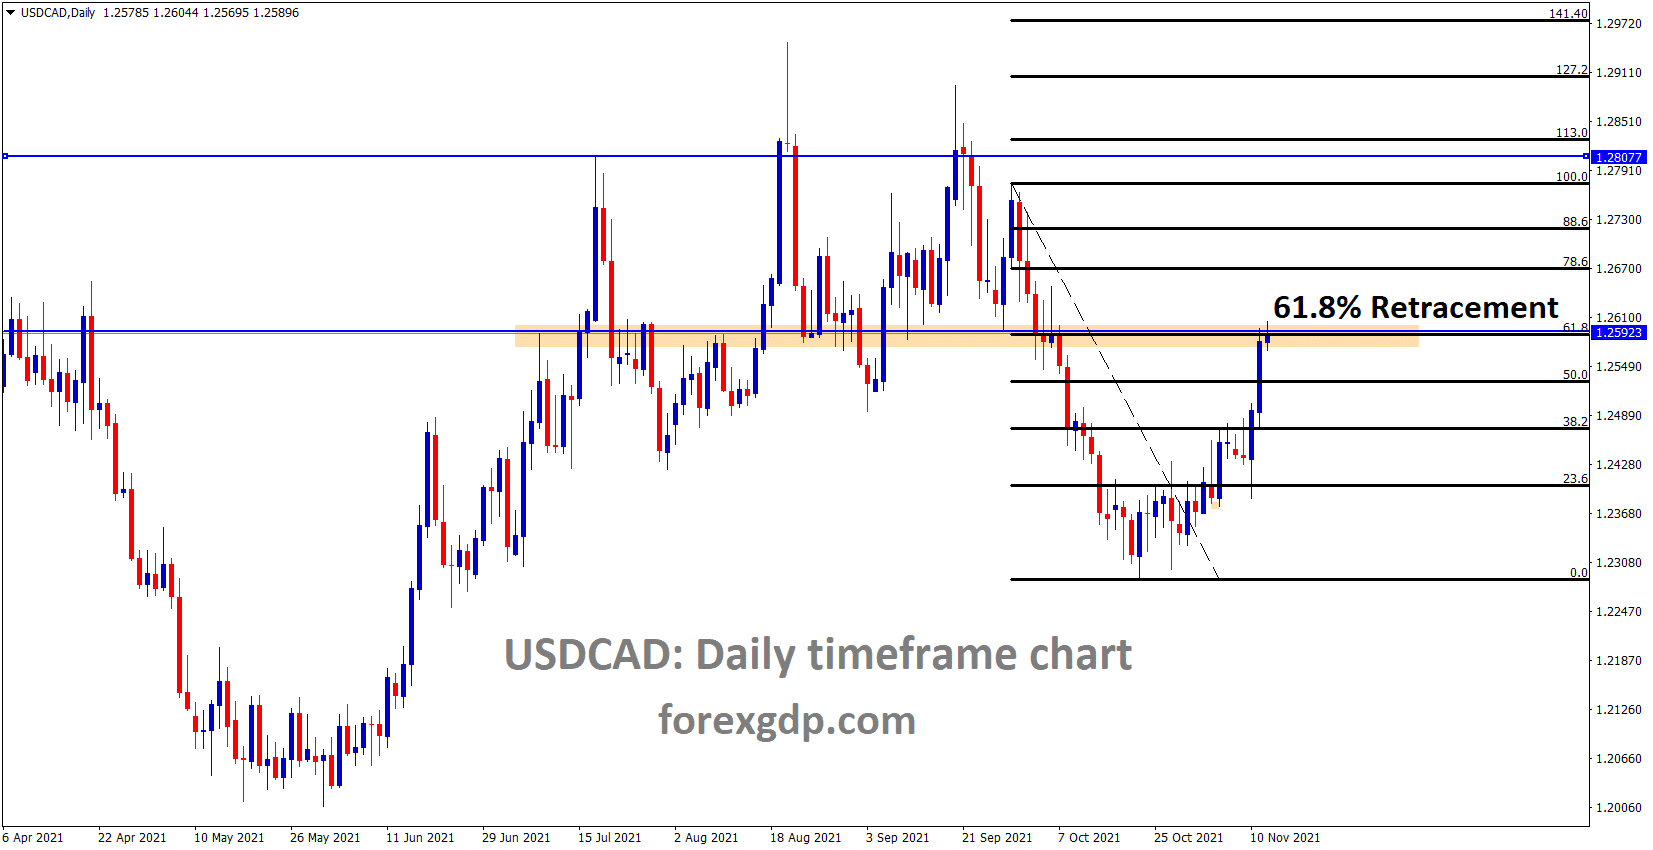 USDCAD has reached the Retracement area of 61.8 and the previous resistance area